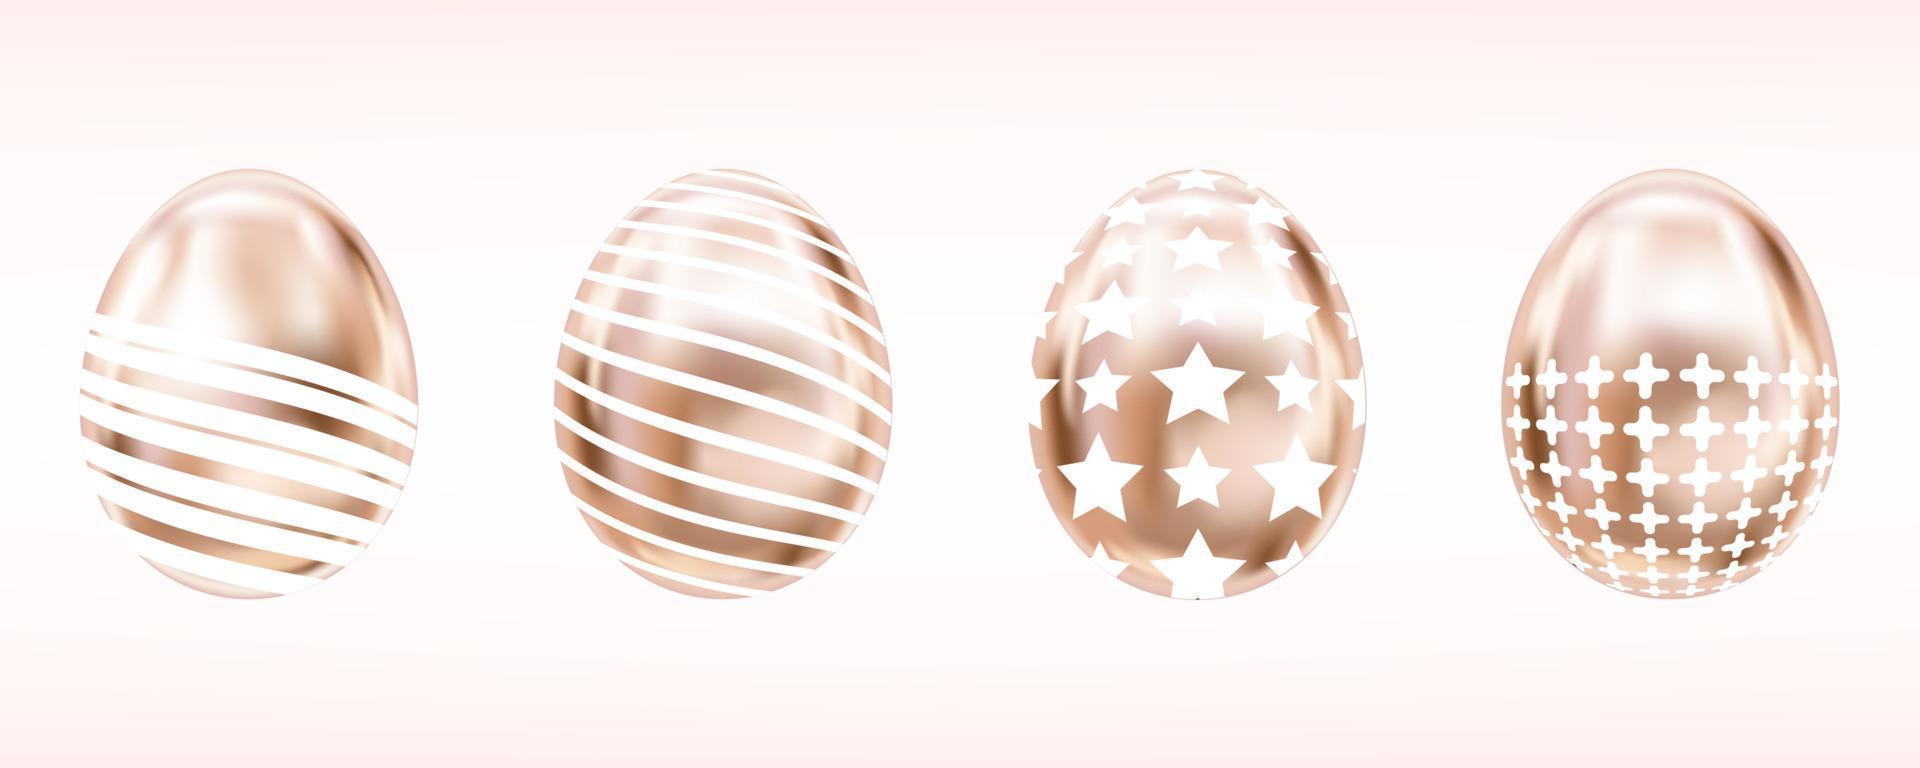 Four glance metallic eggs in pink color with white star, cross and stripes. Isolated objects for Easter decoration vector